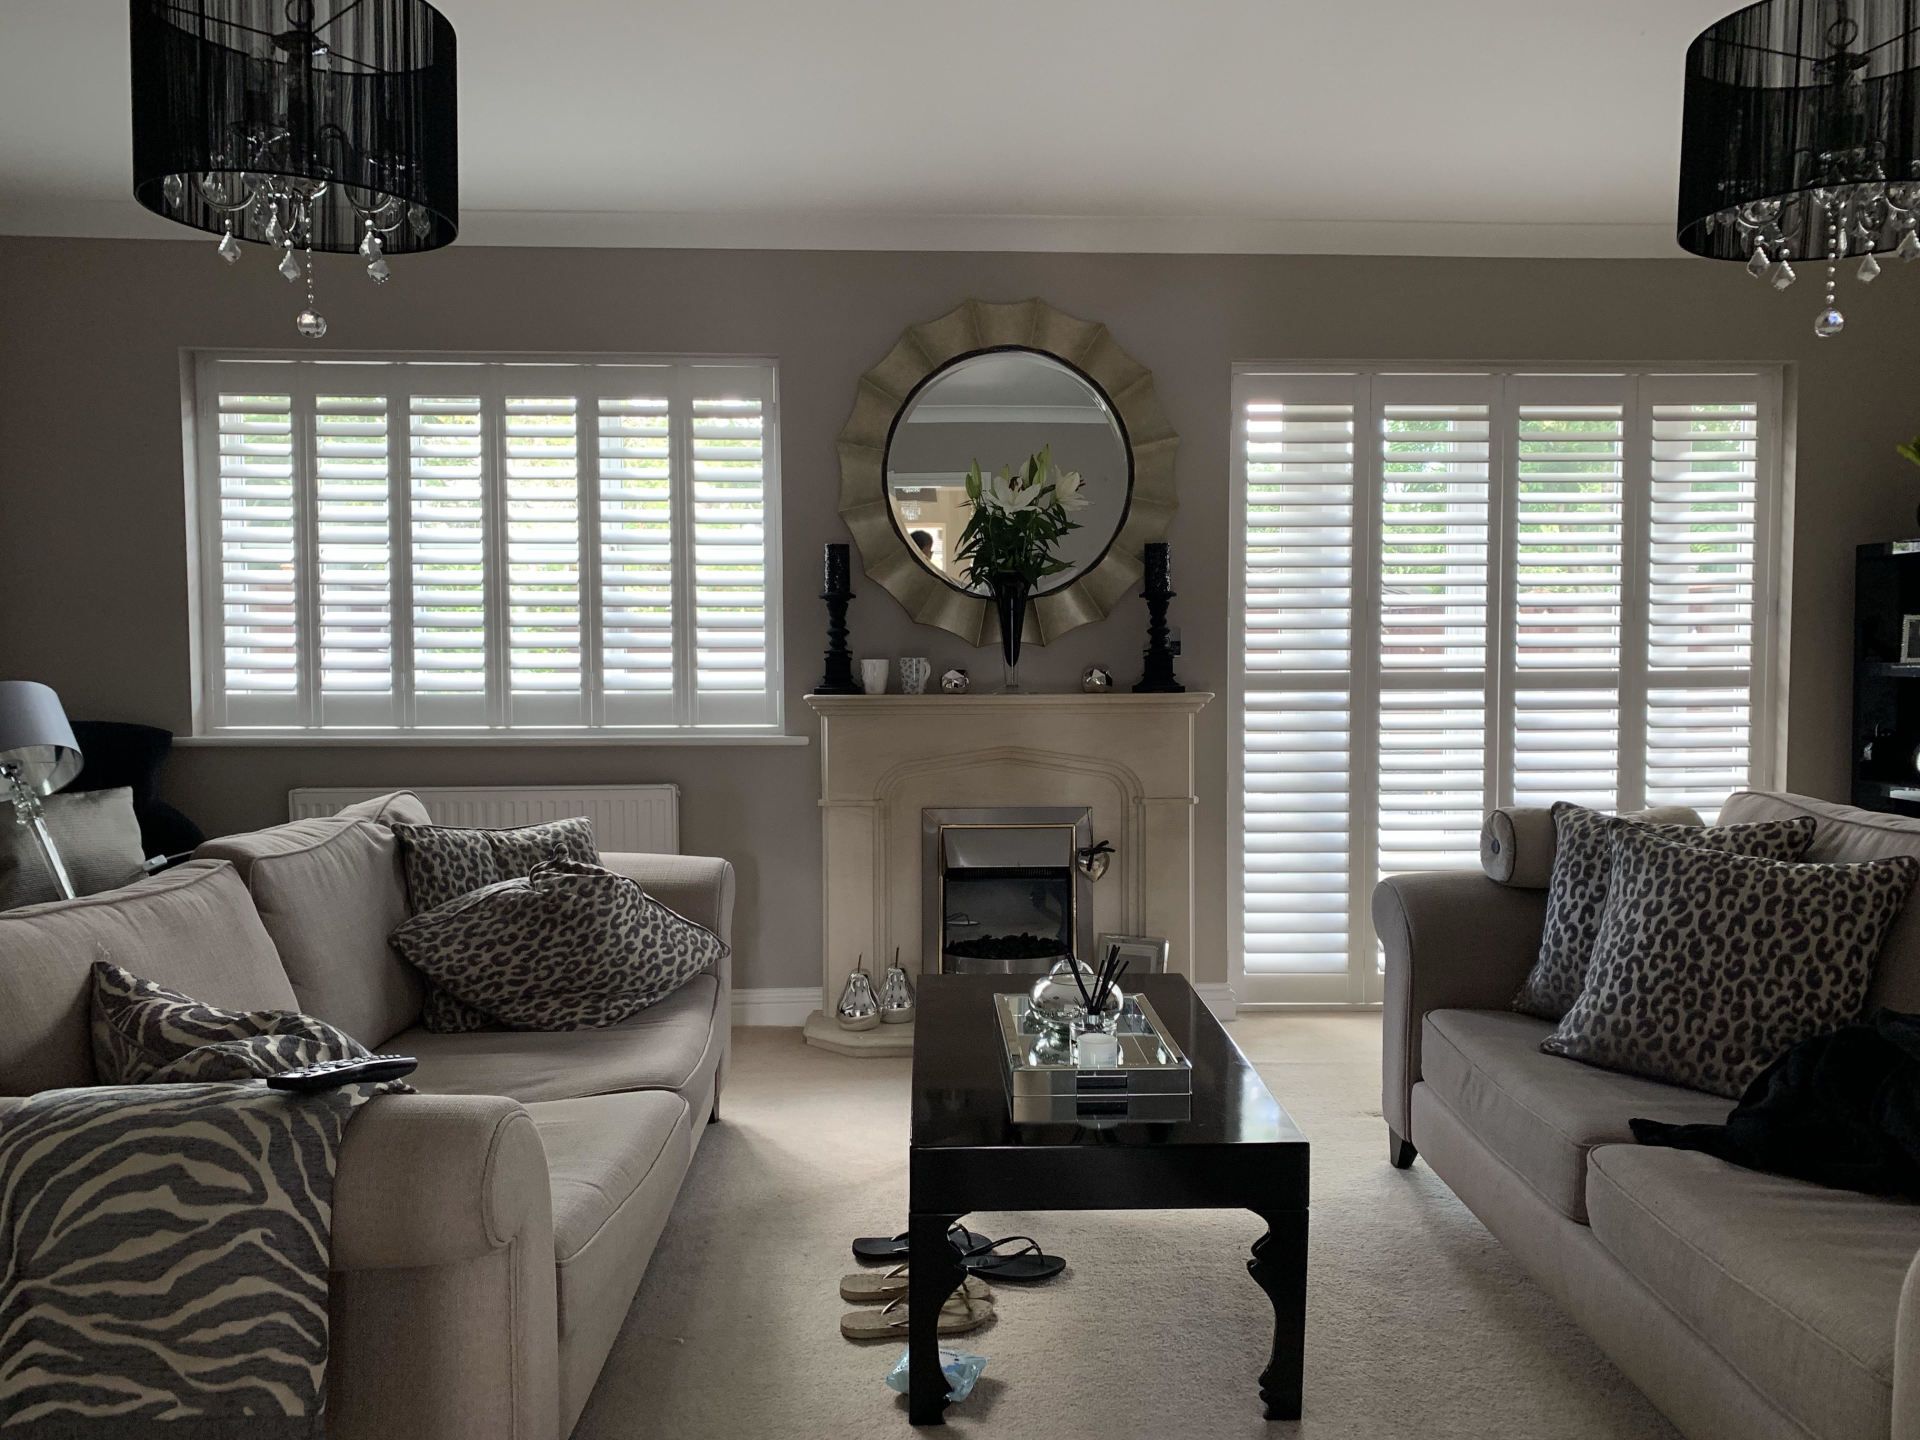 British Made Shutters available to purchase in Tadworth | Wooden Shutters | Patio Door Shutters |  Made-to-Measure Shutters